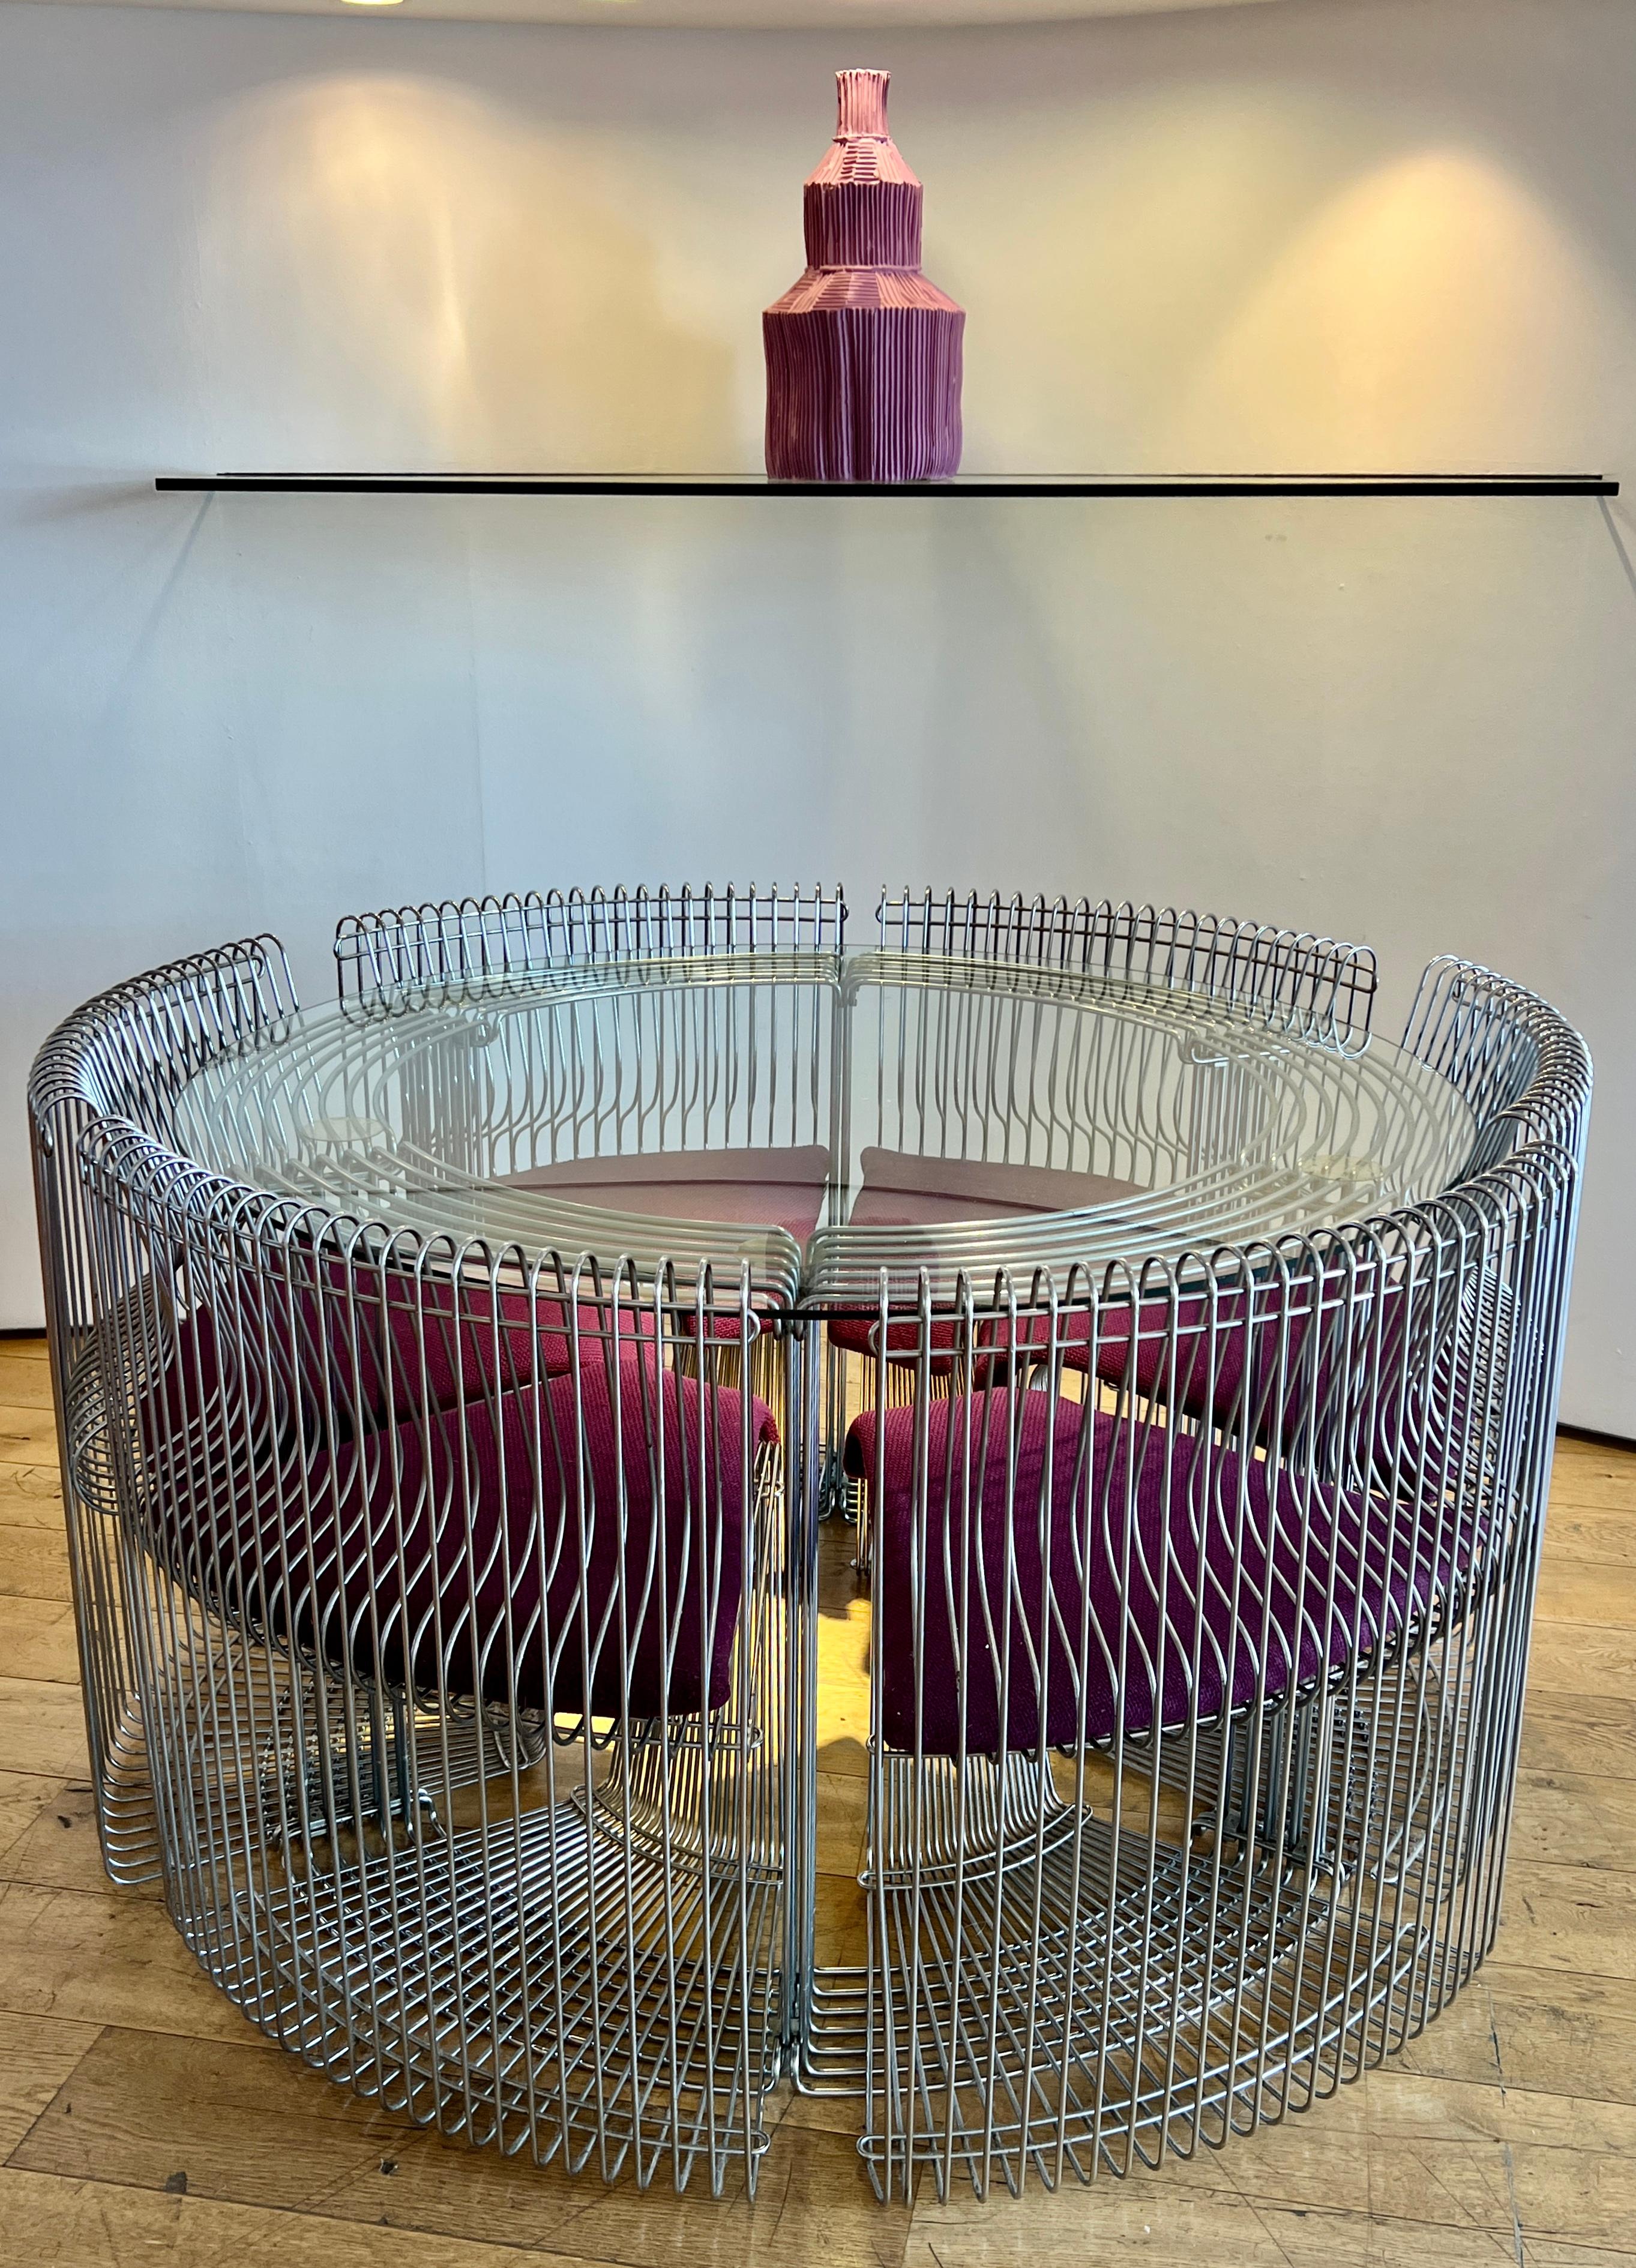 Designed 1971, for Fritz Hansen, Denmark
Chrome-plated steel with glass top. Six chairs slide underneath, each with its original textured aubergine seat pad secured by small plastic hooks. (Seat cushions are removable)..
Table ⌀ 121 / H 70